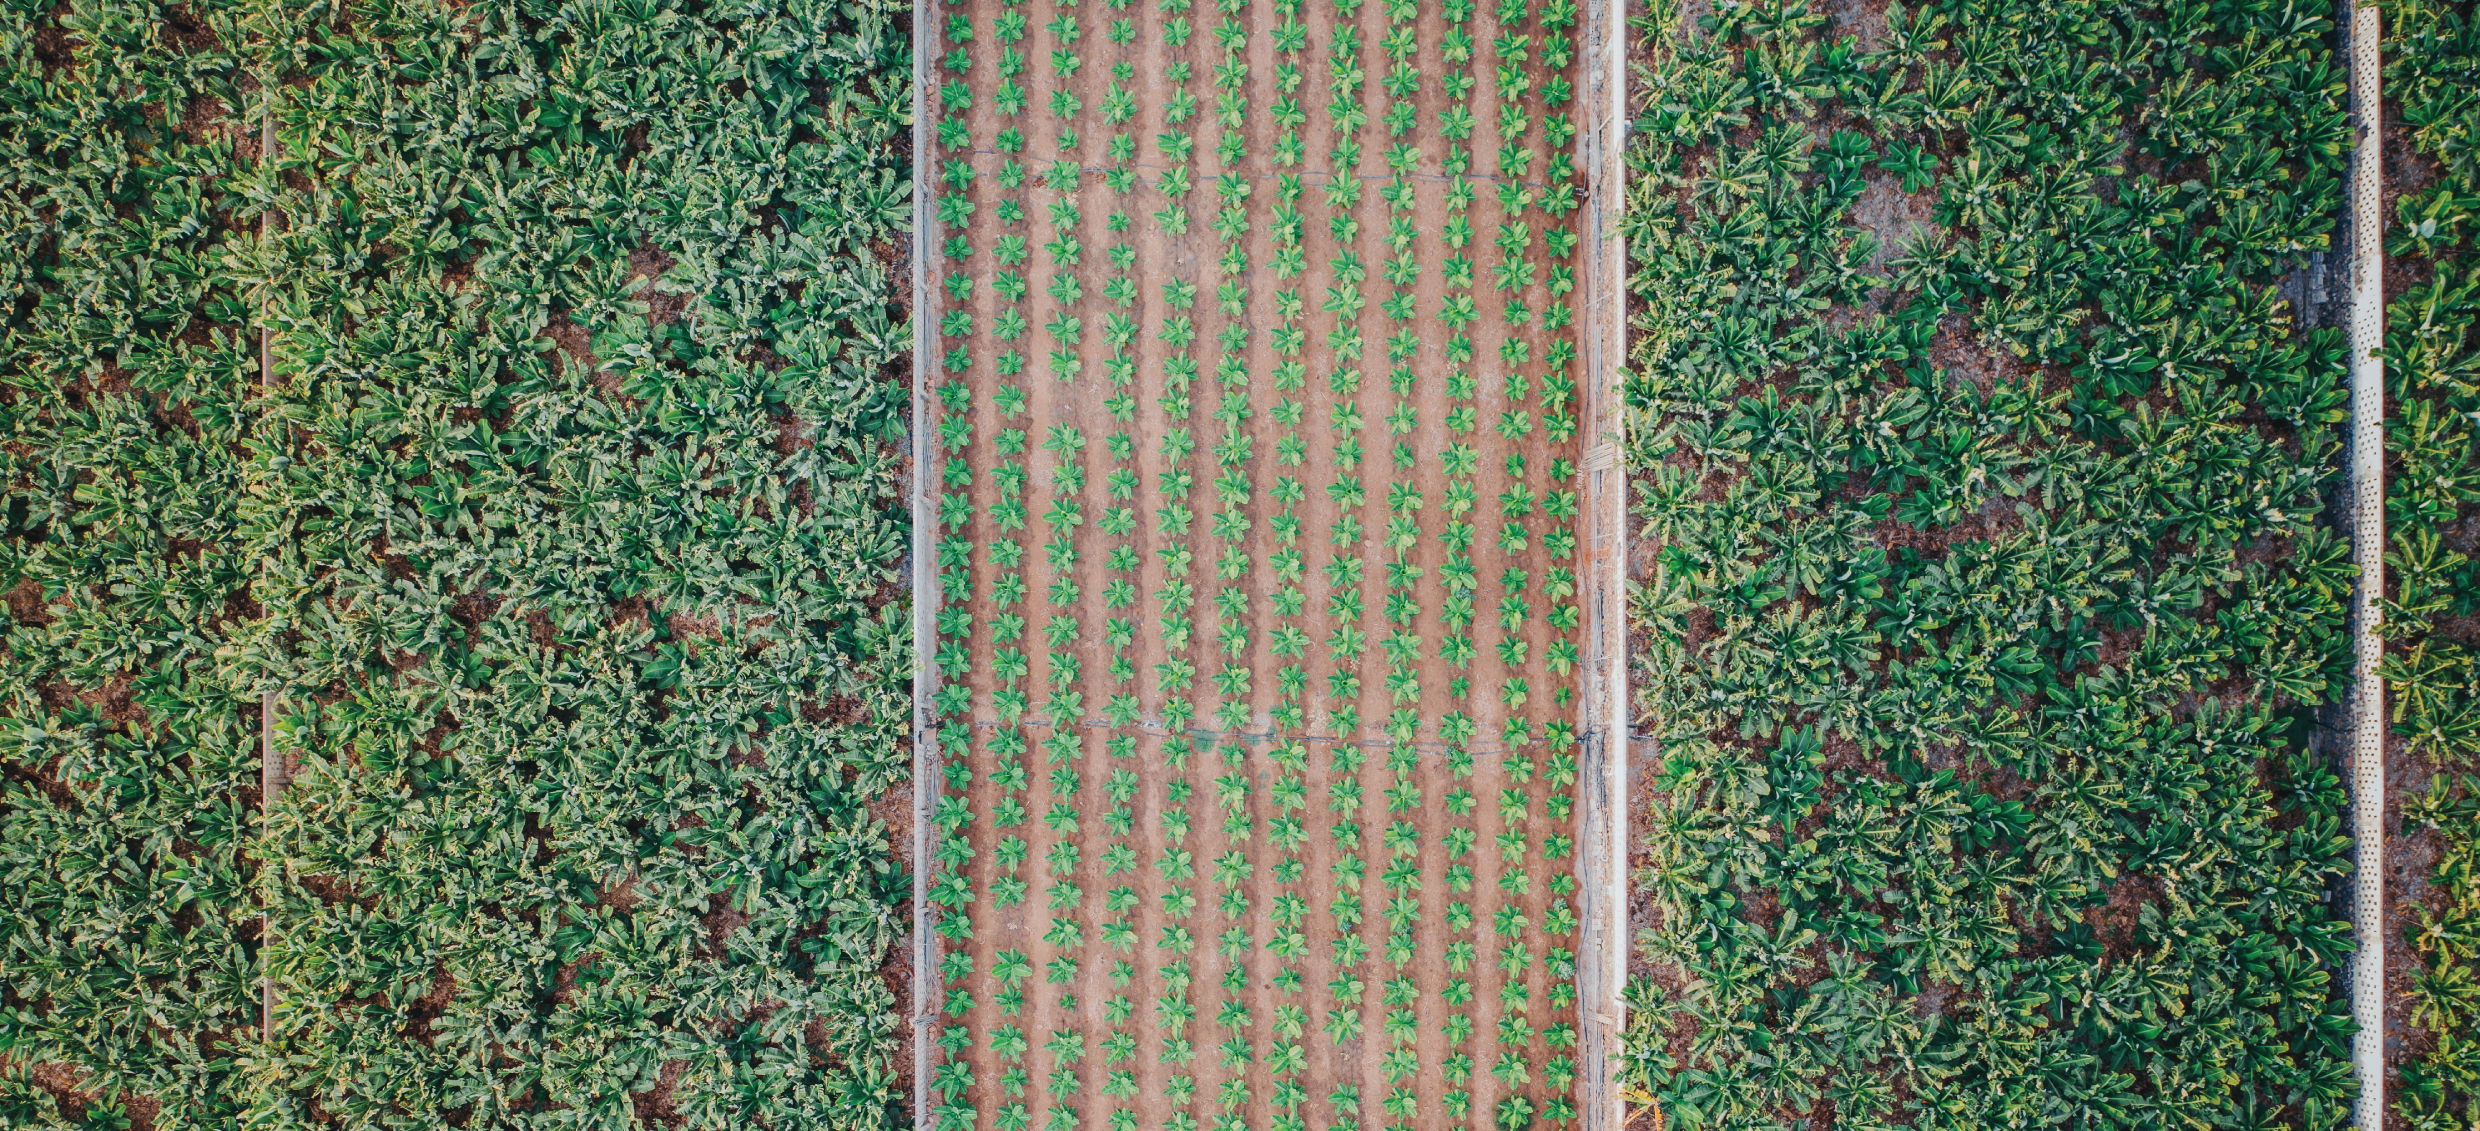 An overhead view rows of produce crop at a sustainable farm.